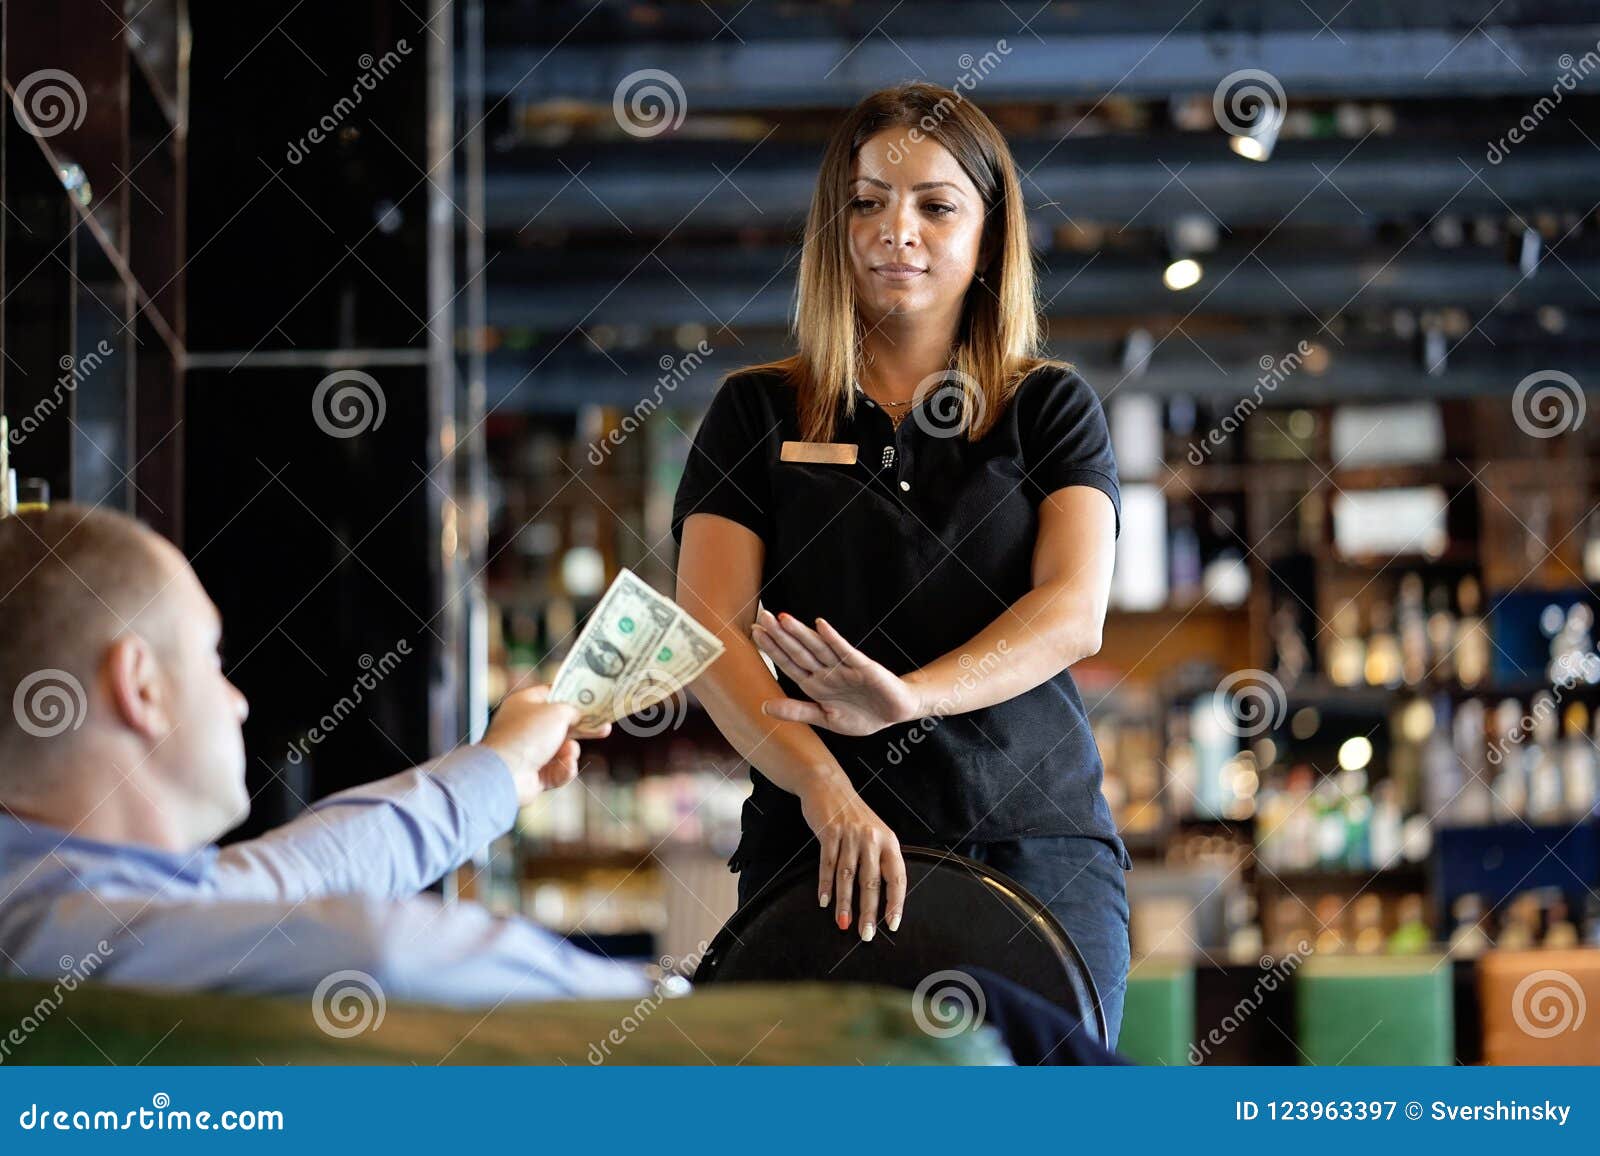 Girl Of The Waitress Gets A Tip Stock Image Image Of Perso